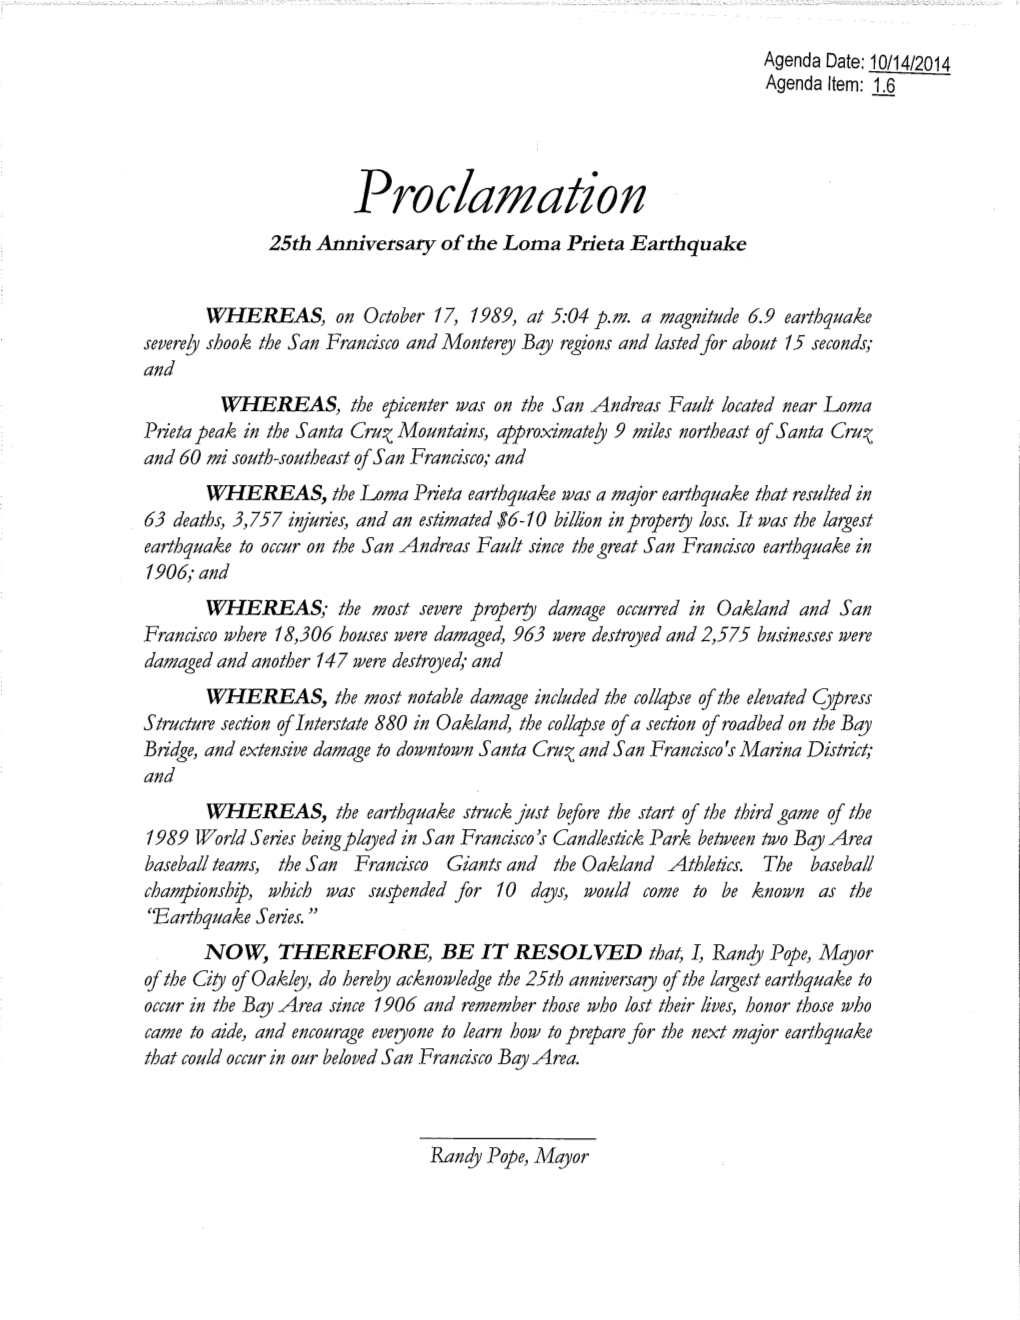 Proclamation Recognizing the 25Th Anniversary of The